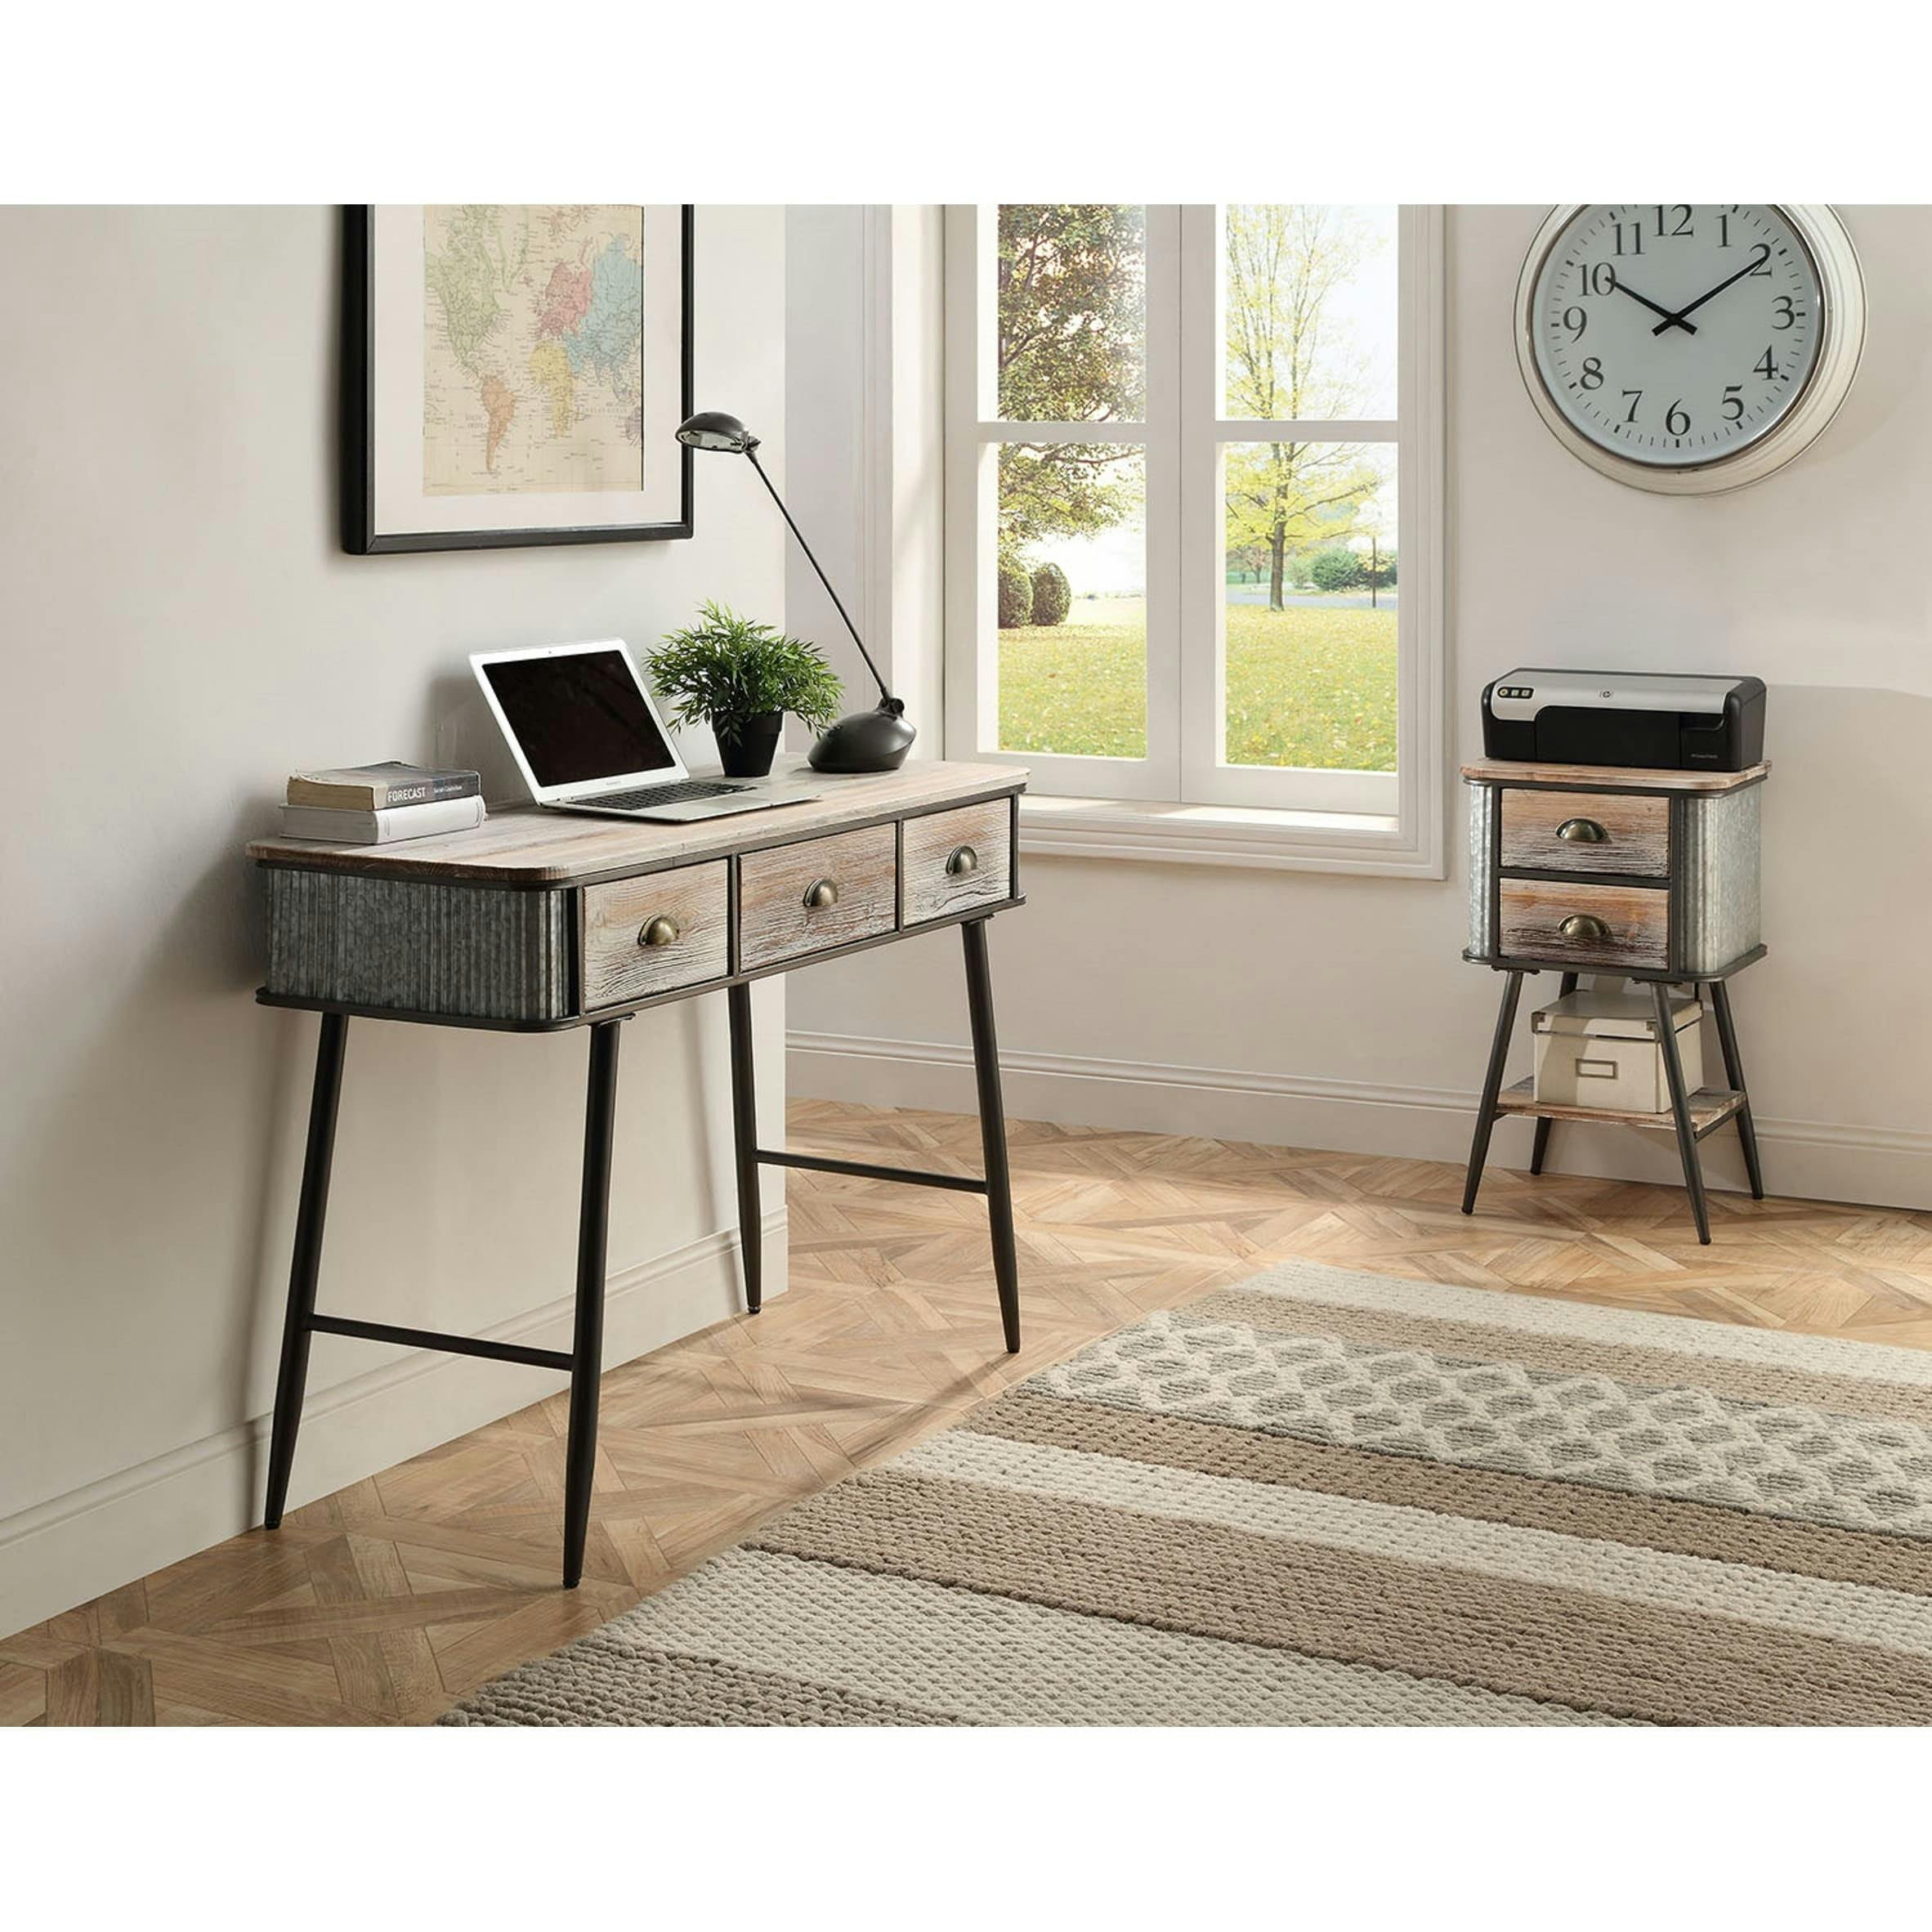 Washed Fir Wood and Black Metal 3-Drawer Desk/Table with Whitewash Finish